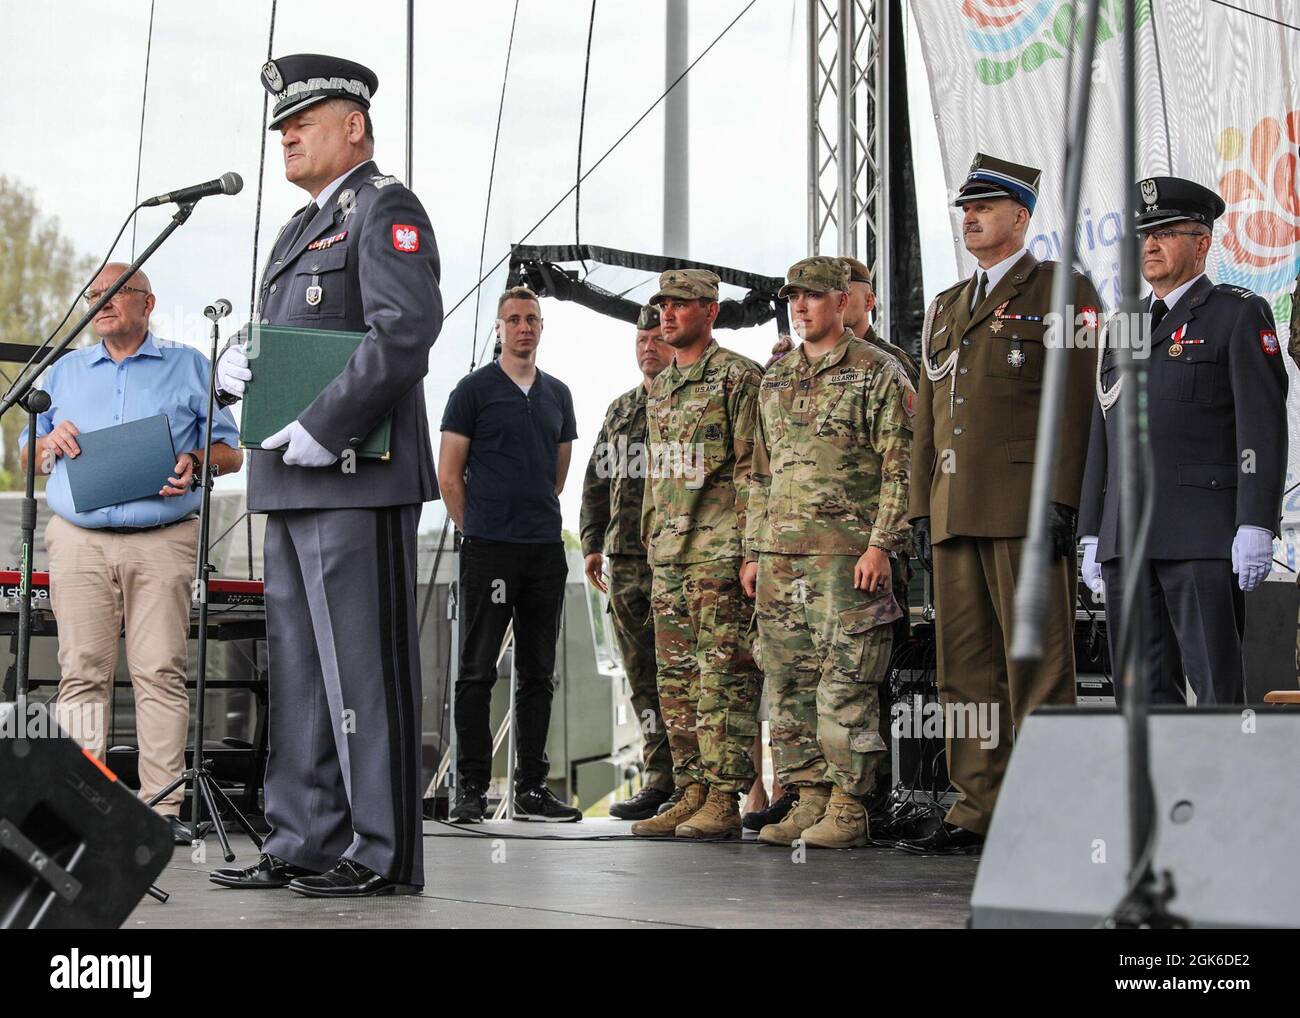 Soldiers from 2nd Battalion, 34th Armored Regiment, 1st Armored Brigade Combat Team, 1st Infantry Division, receive recognition from Polish Armed Forces leadership during a Polish Armed Forces Day event in Pila, Poland, August 14, 2021. The day celebrates when the Polish Army successfully repulsed a Red Army offensive outside of Warsaw in mid-August 1920. The 1st Infantry Division's presence in Poland during Atlantic Resolve contributes to security in the region, providing deterrence and strengthening the Alliance, and that by enhancing that presence, we will continue to ensure democracy, free Stock Photo